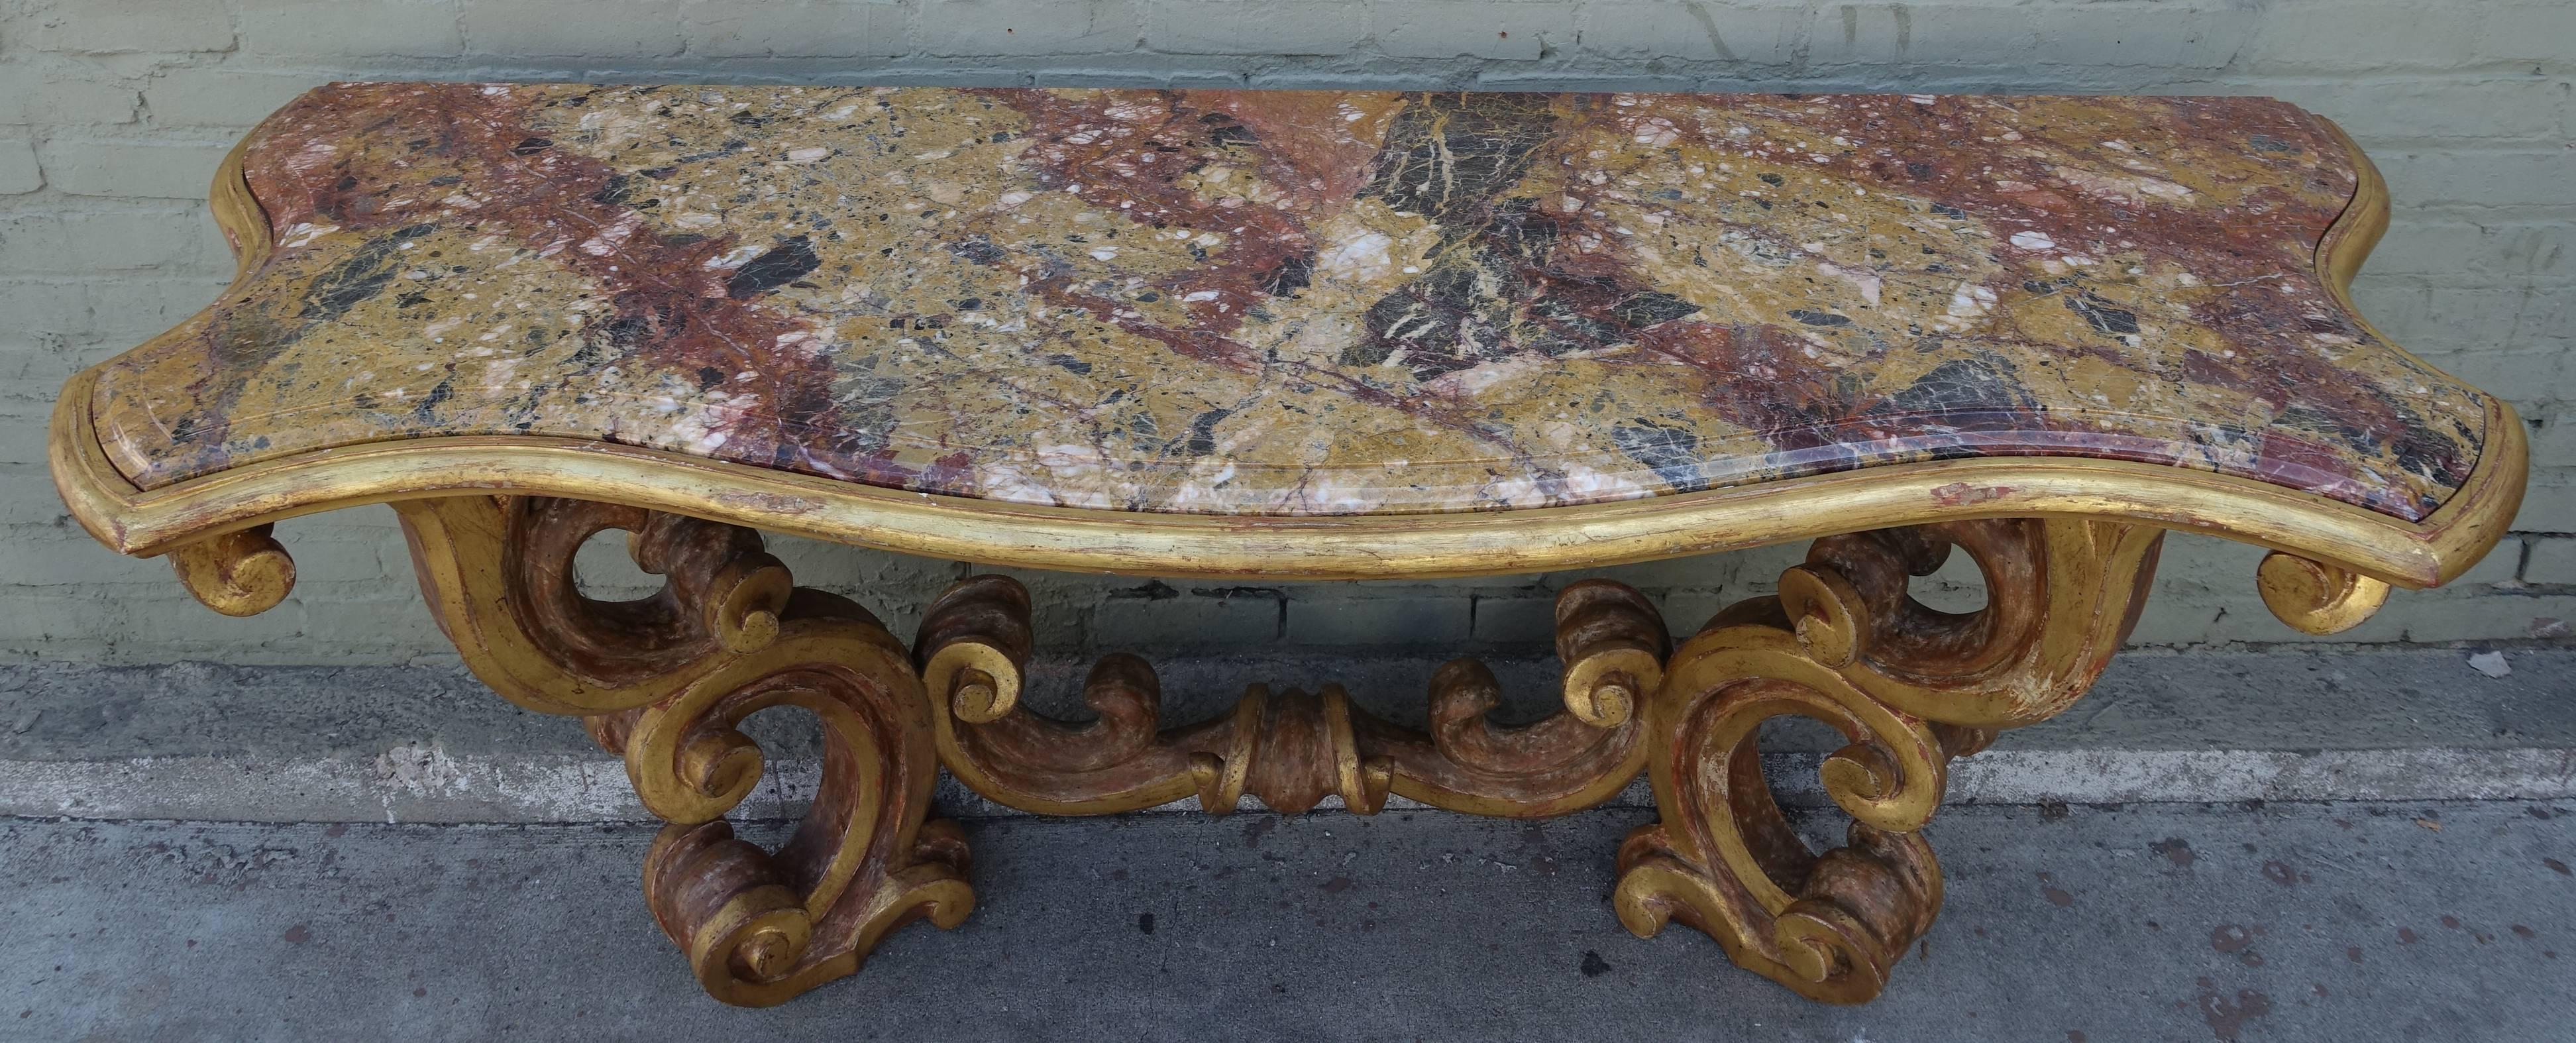 Rococo Giltwood Italian Console with Serpentine Marble Top